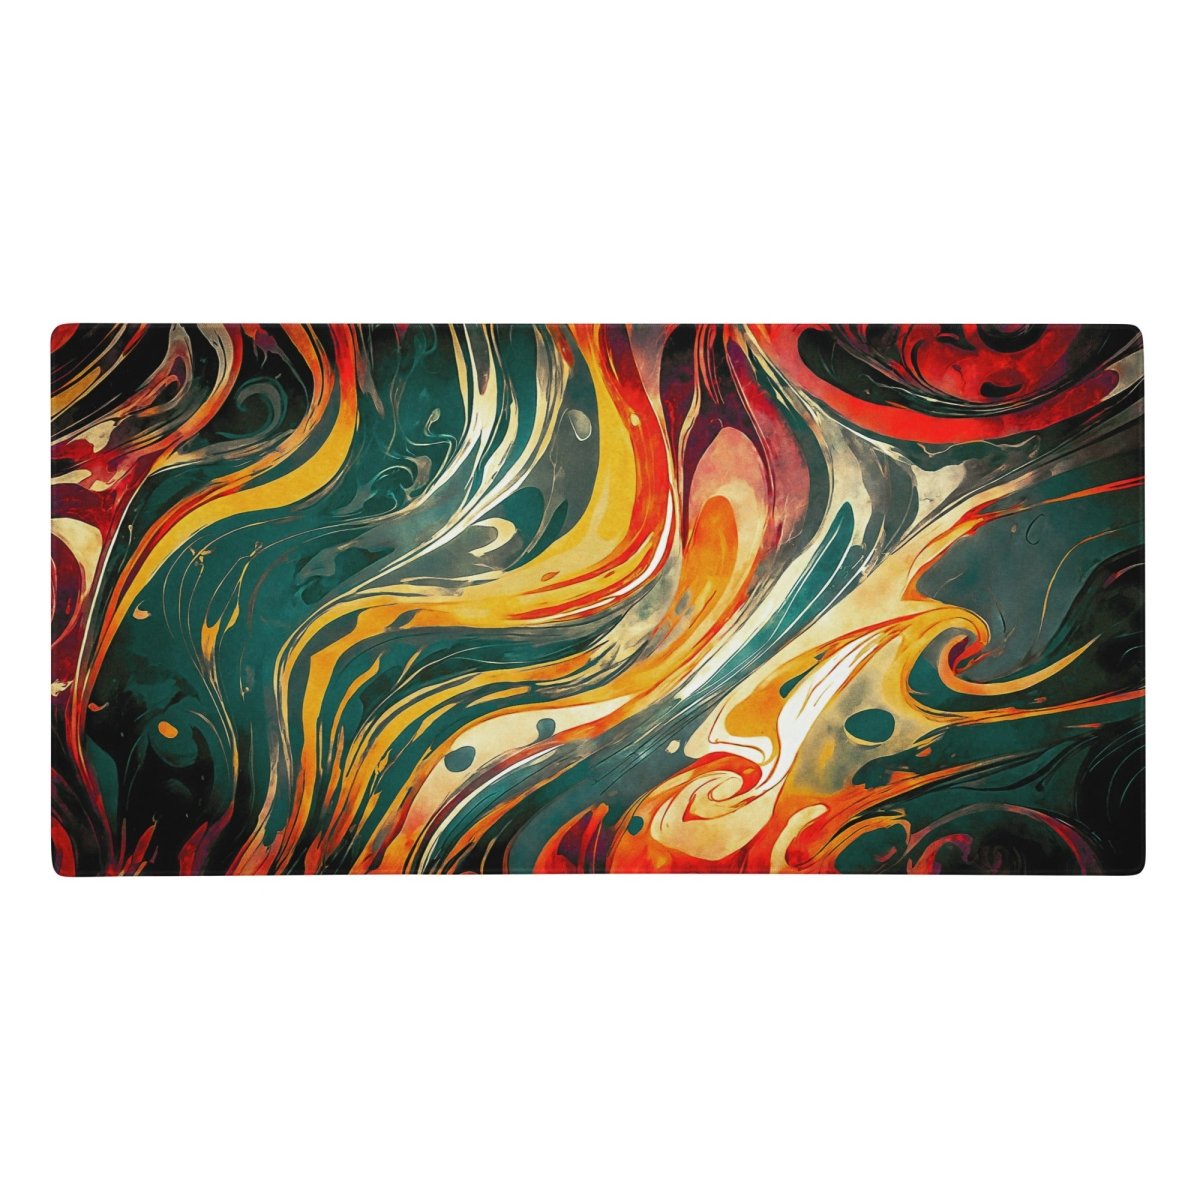 Glaring markings - Gaming mouse pad - Ever colorful